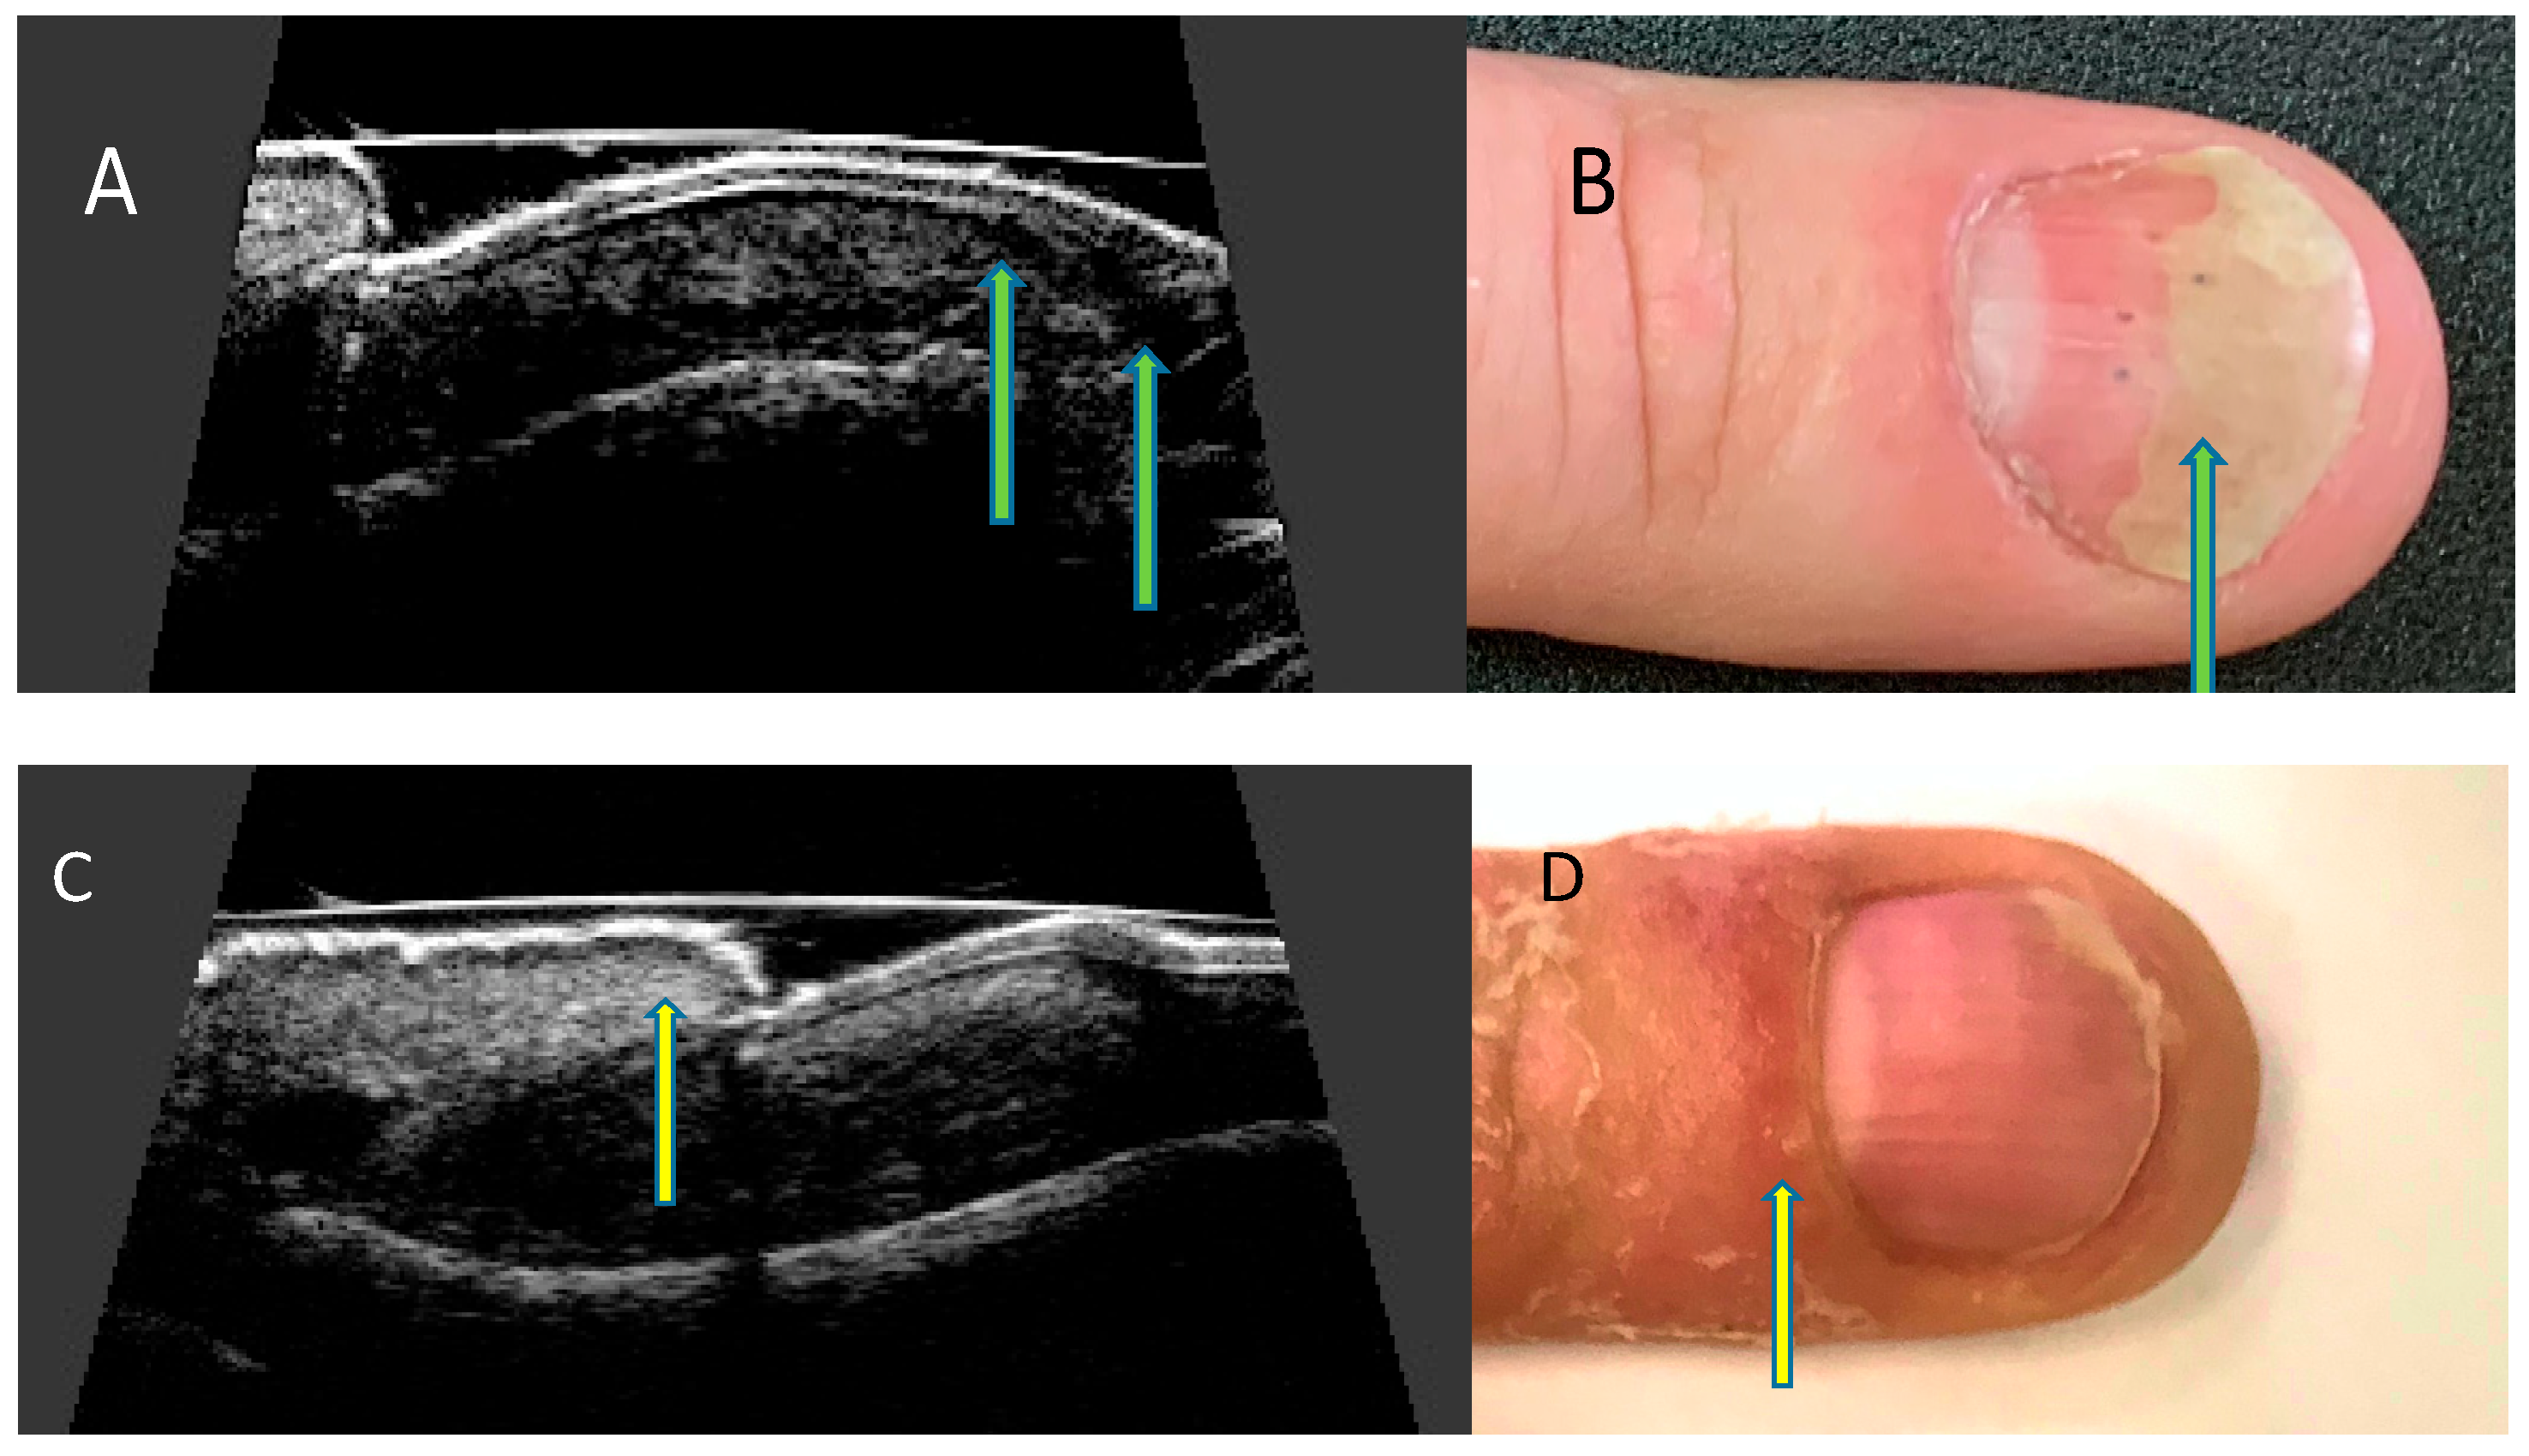 Nails in systemic disease | RCP Journals